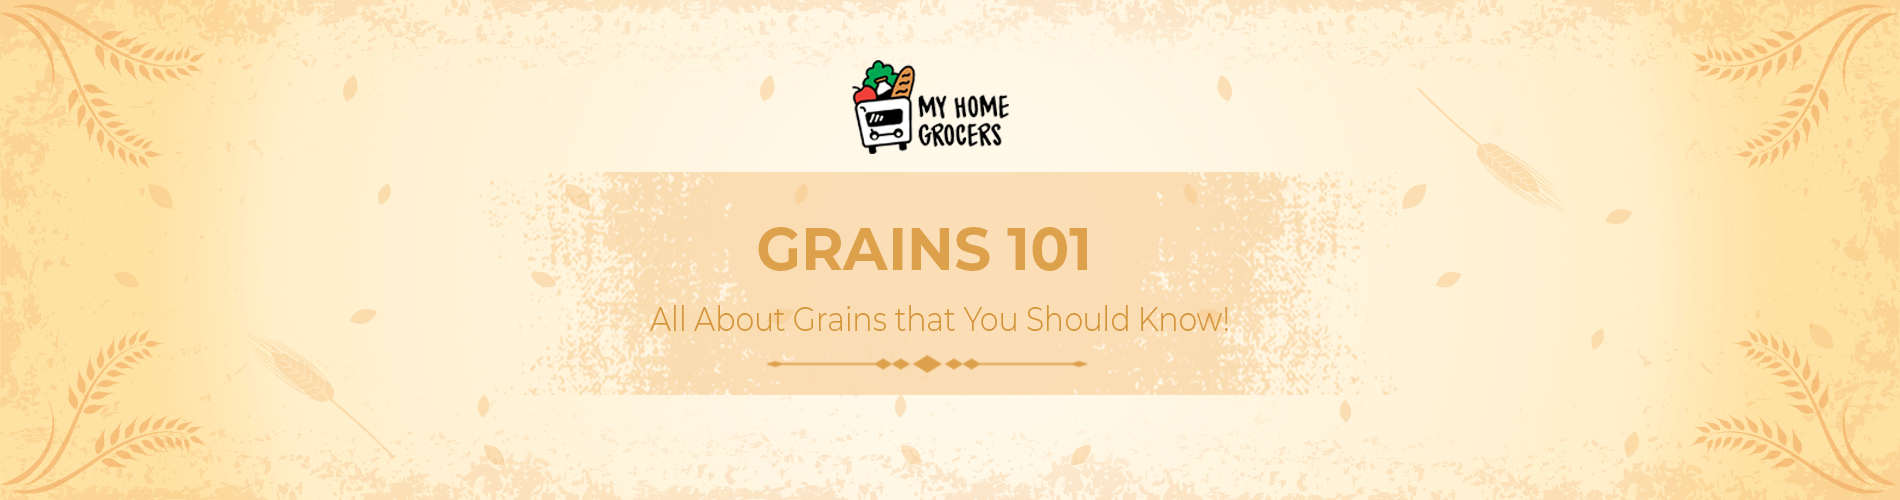 Grains 101- All About Grains that You Should Know!